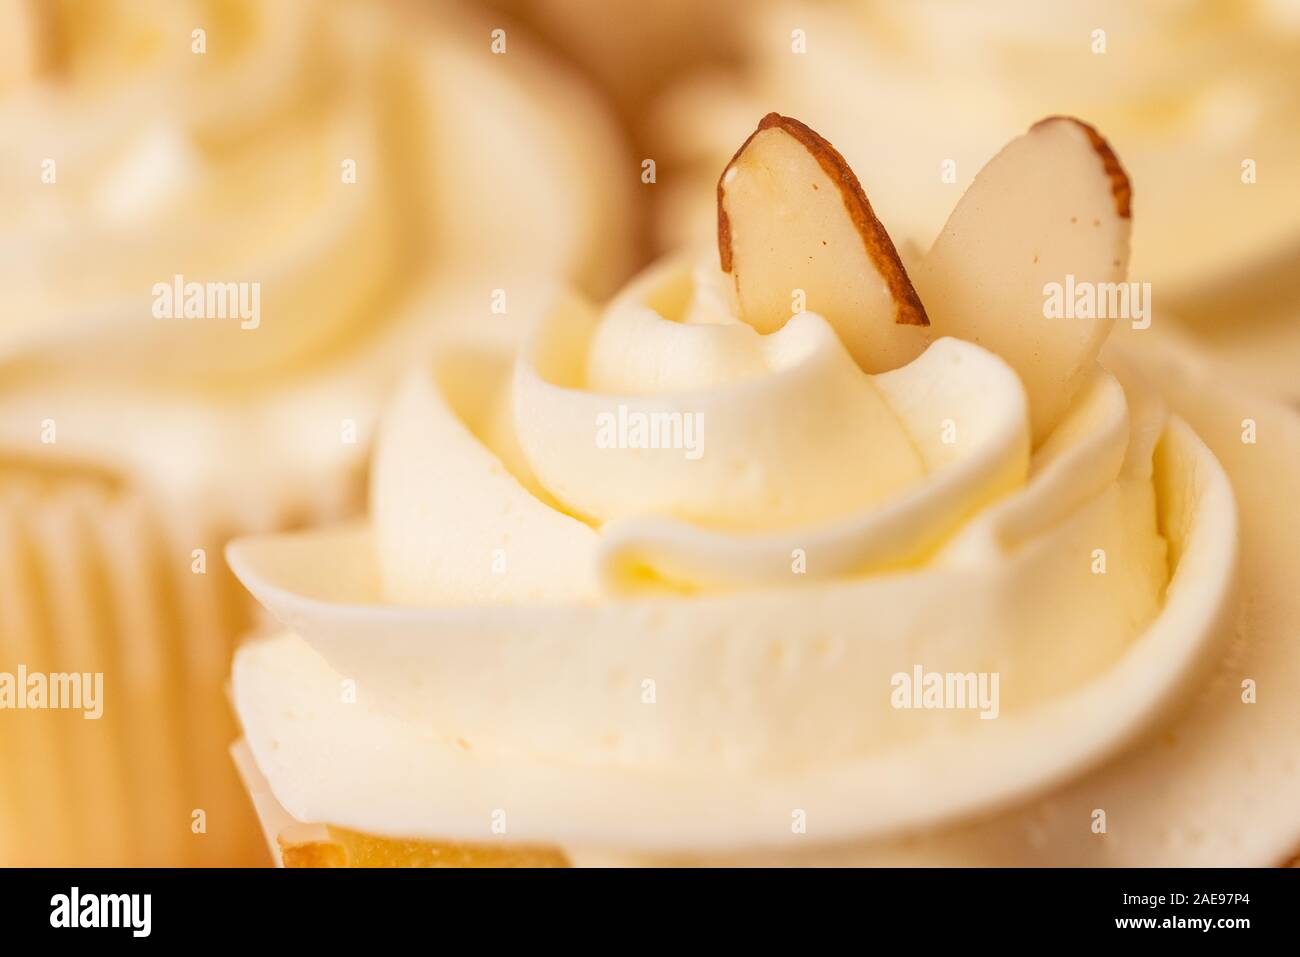 Two almond slices perched atop a cupcake with white icing. Stock Photo